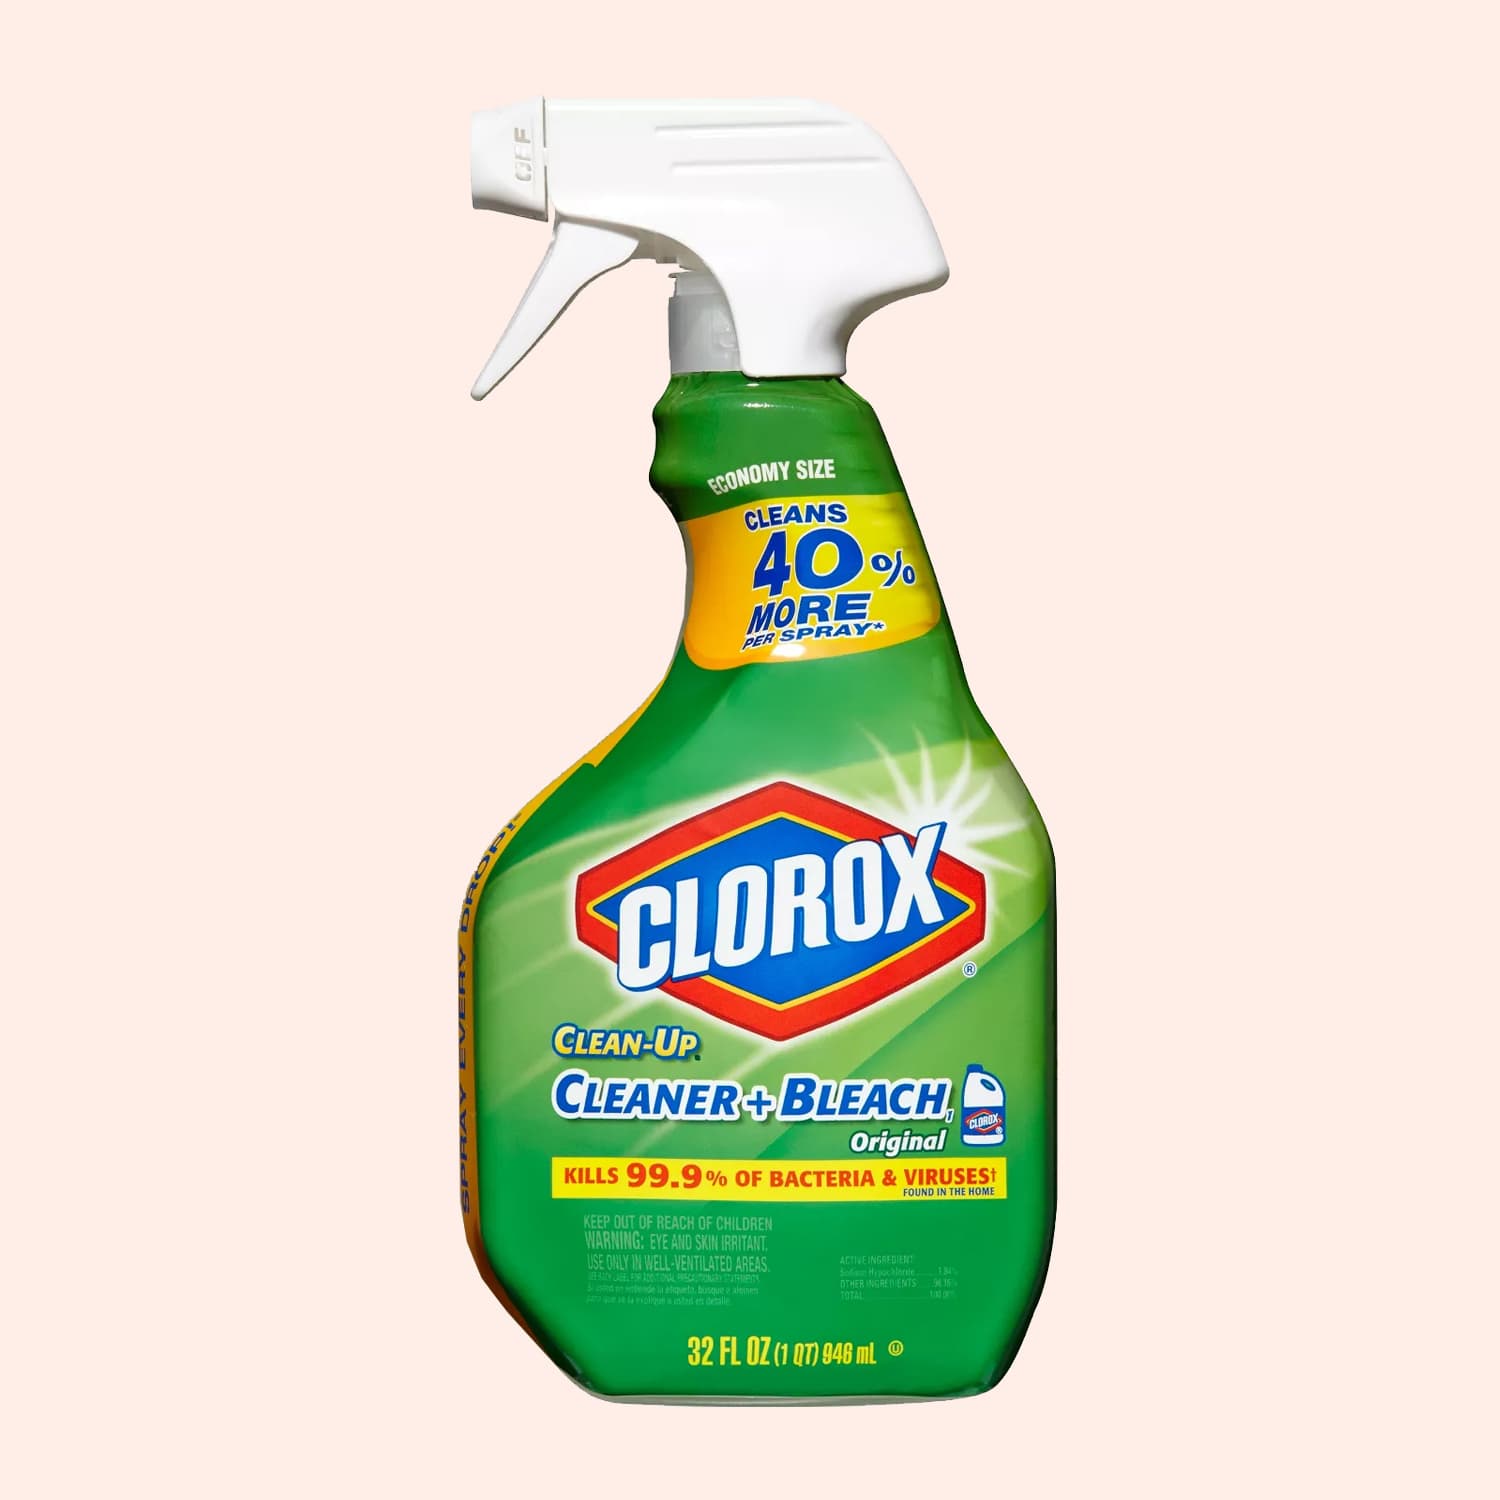 Bleach Cleaning: How to Disinfect Surfaces and Whiten Laundry with